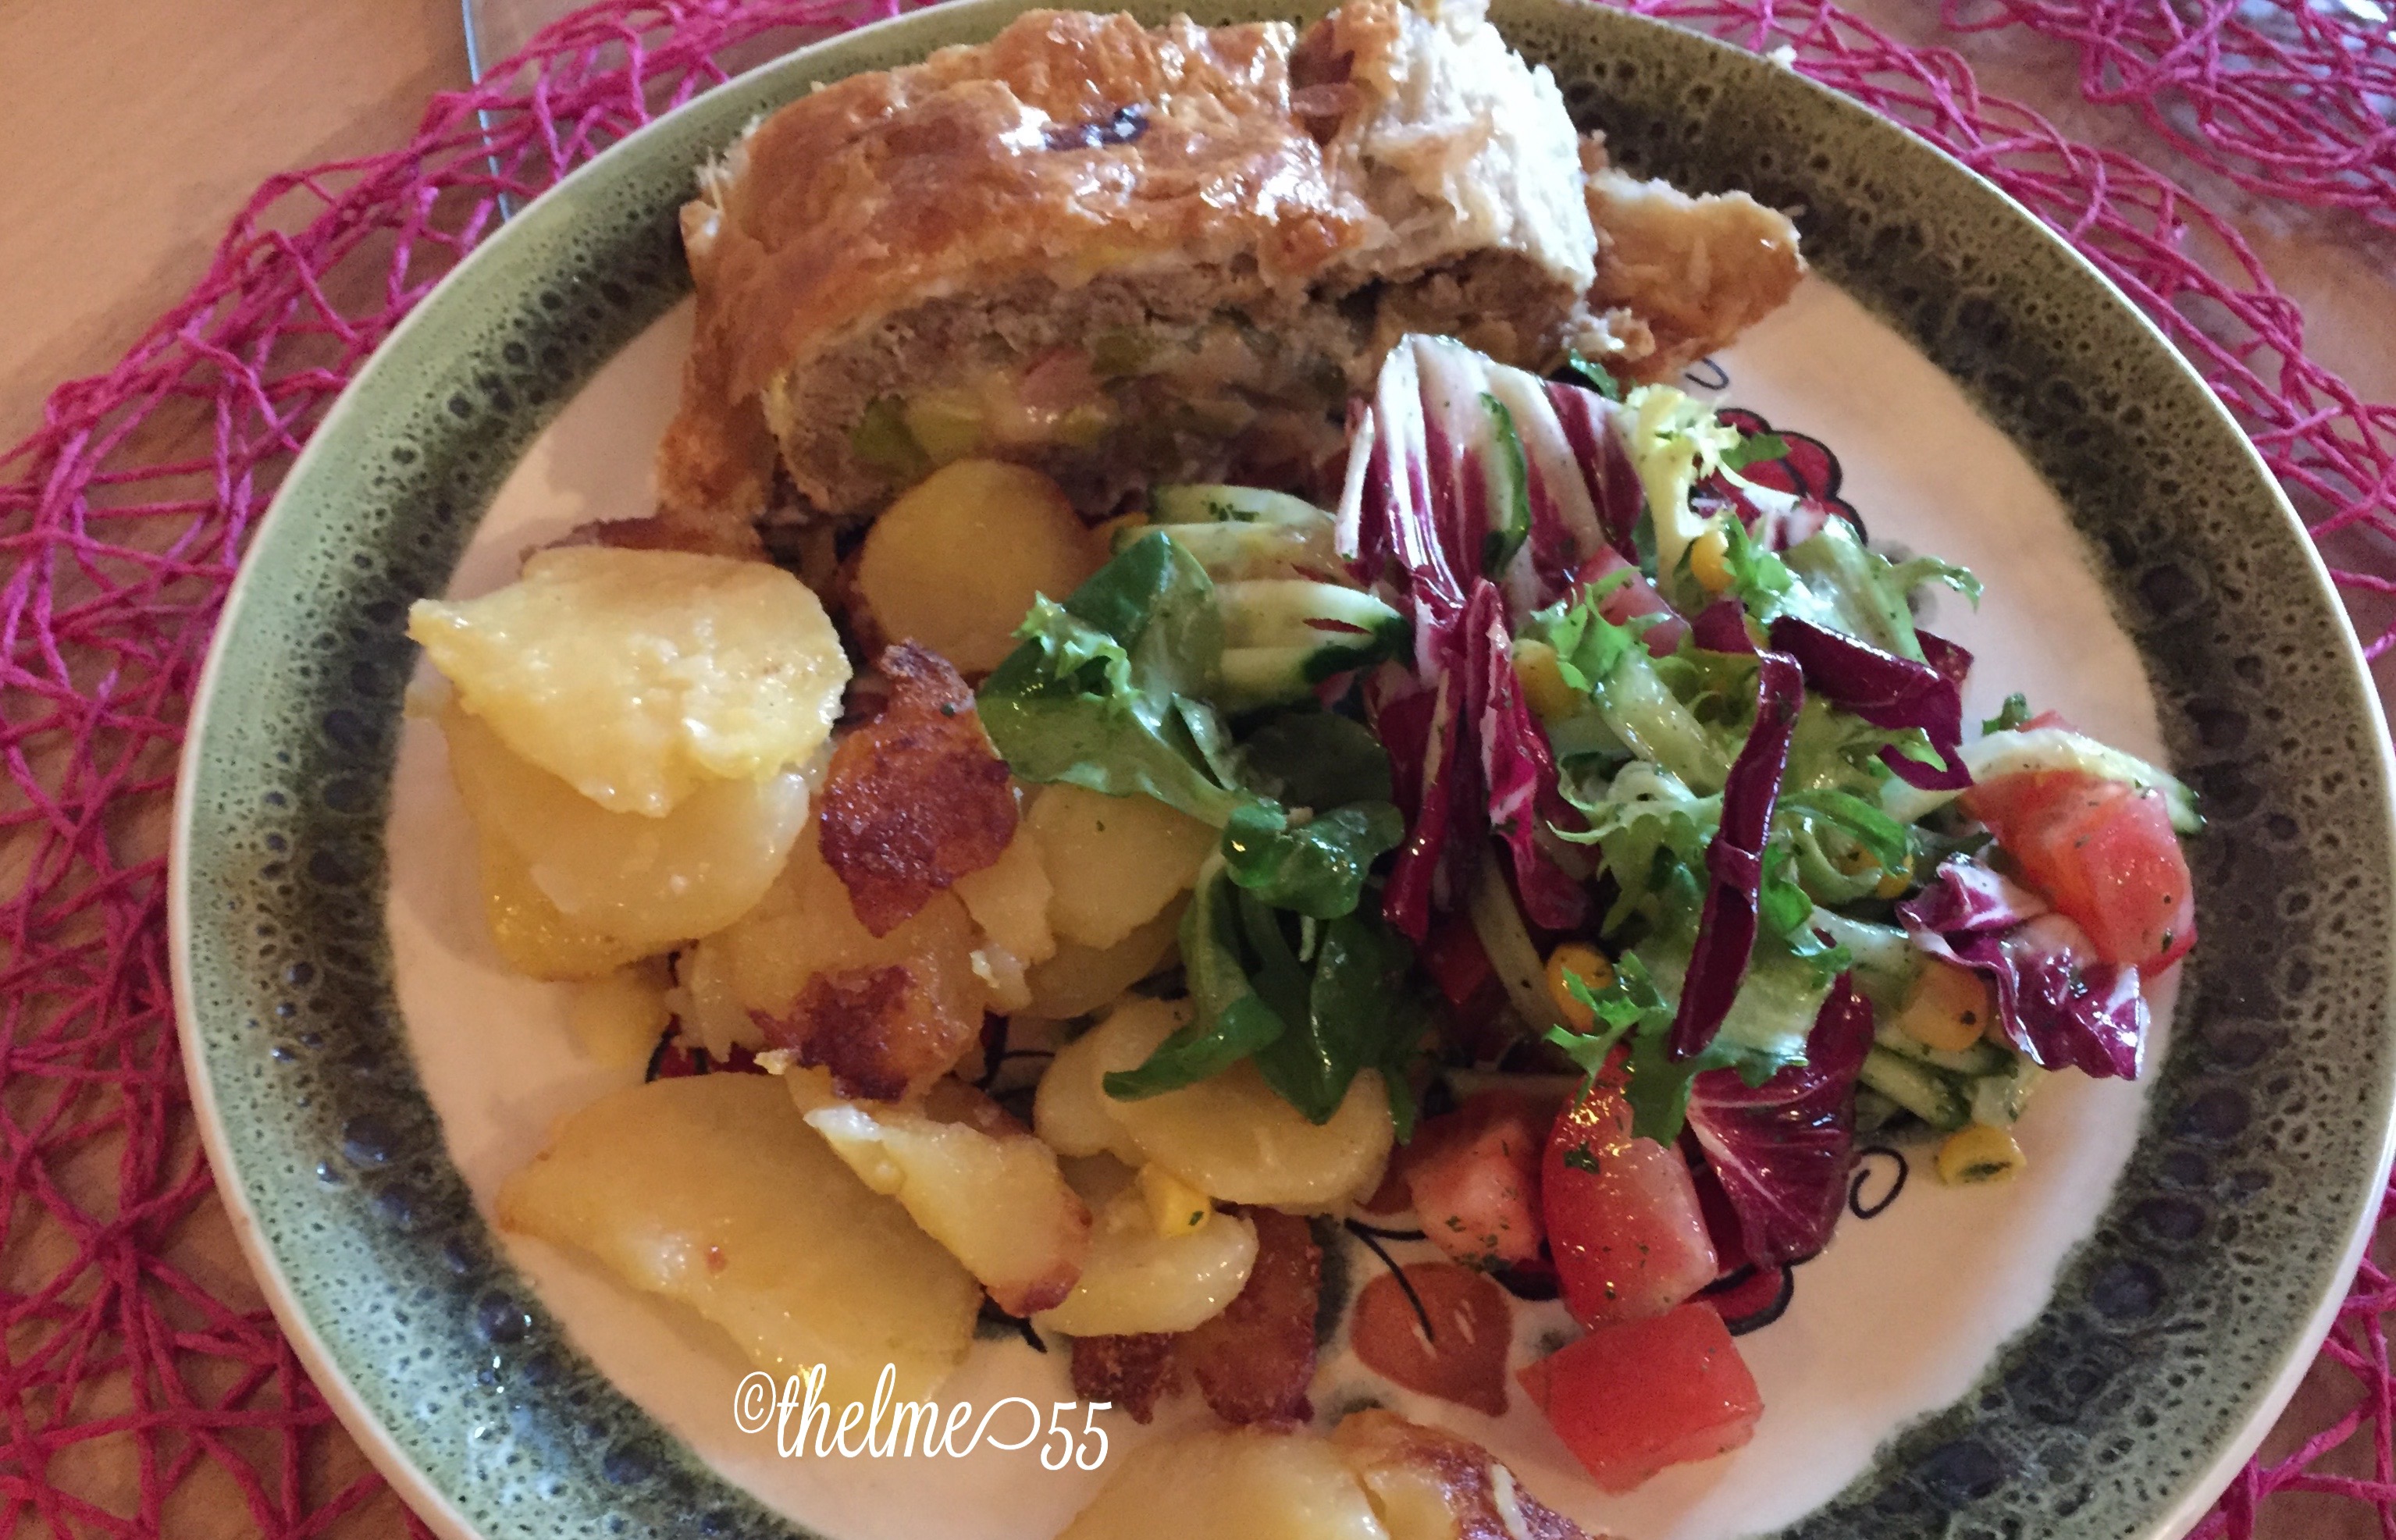 Filo wrapped meatloaf, fried potatoes and salad